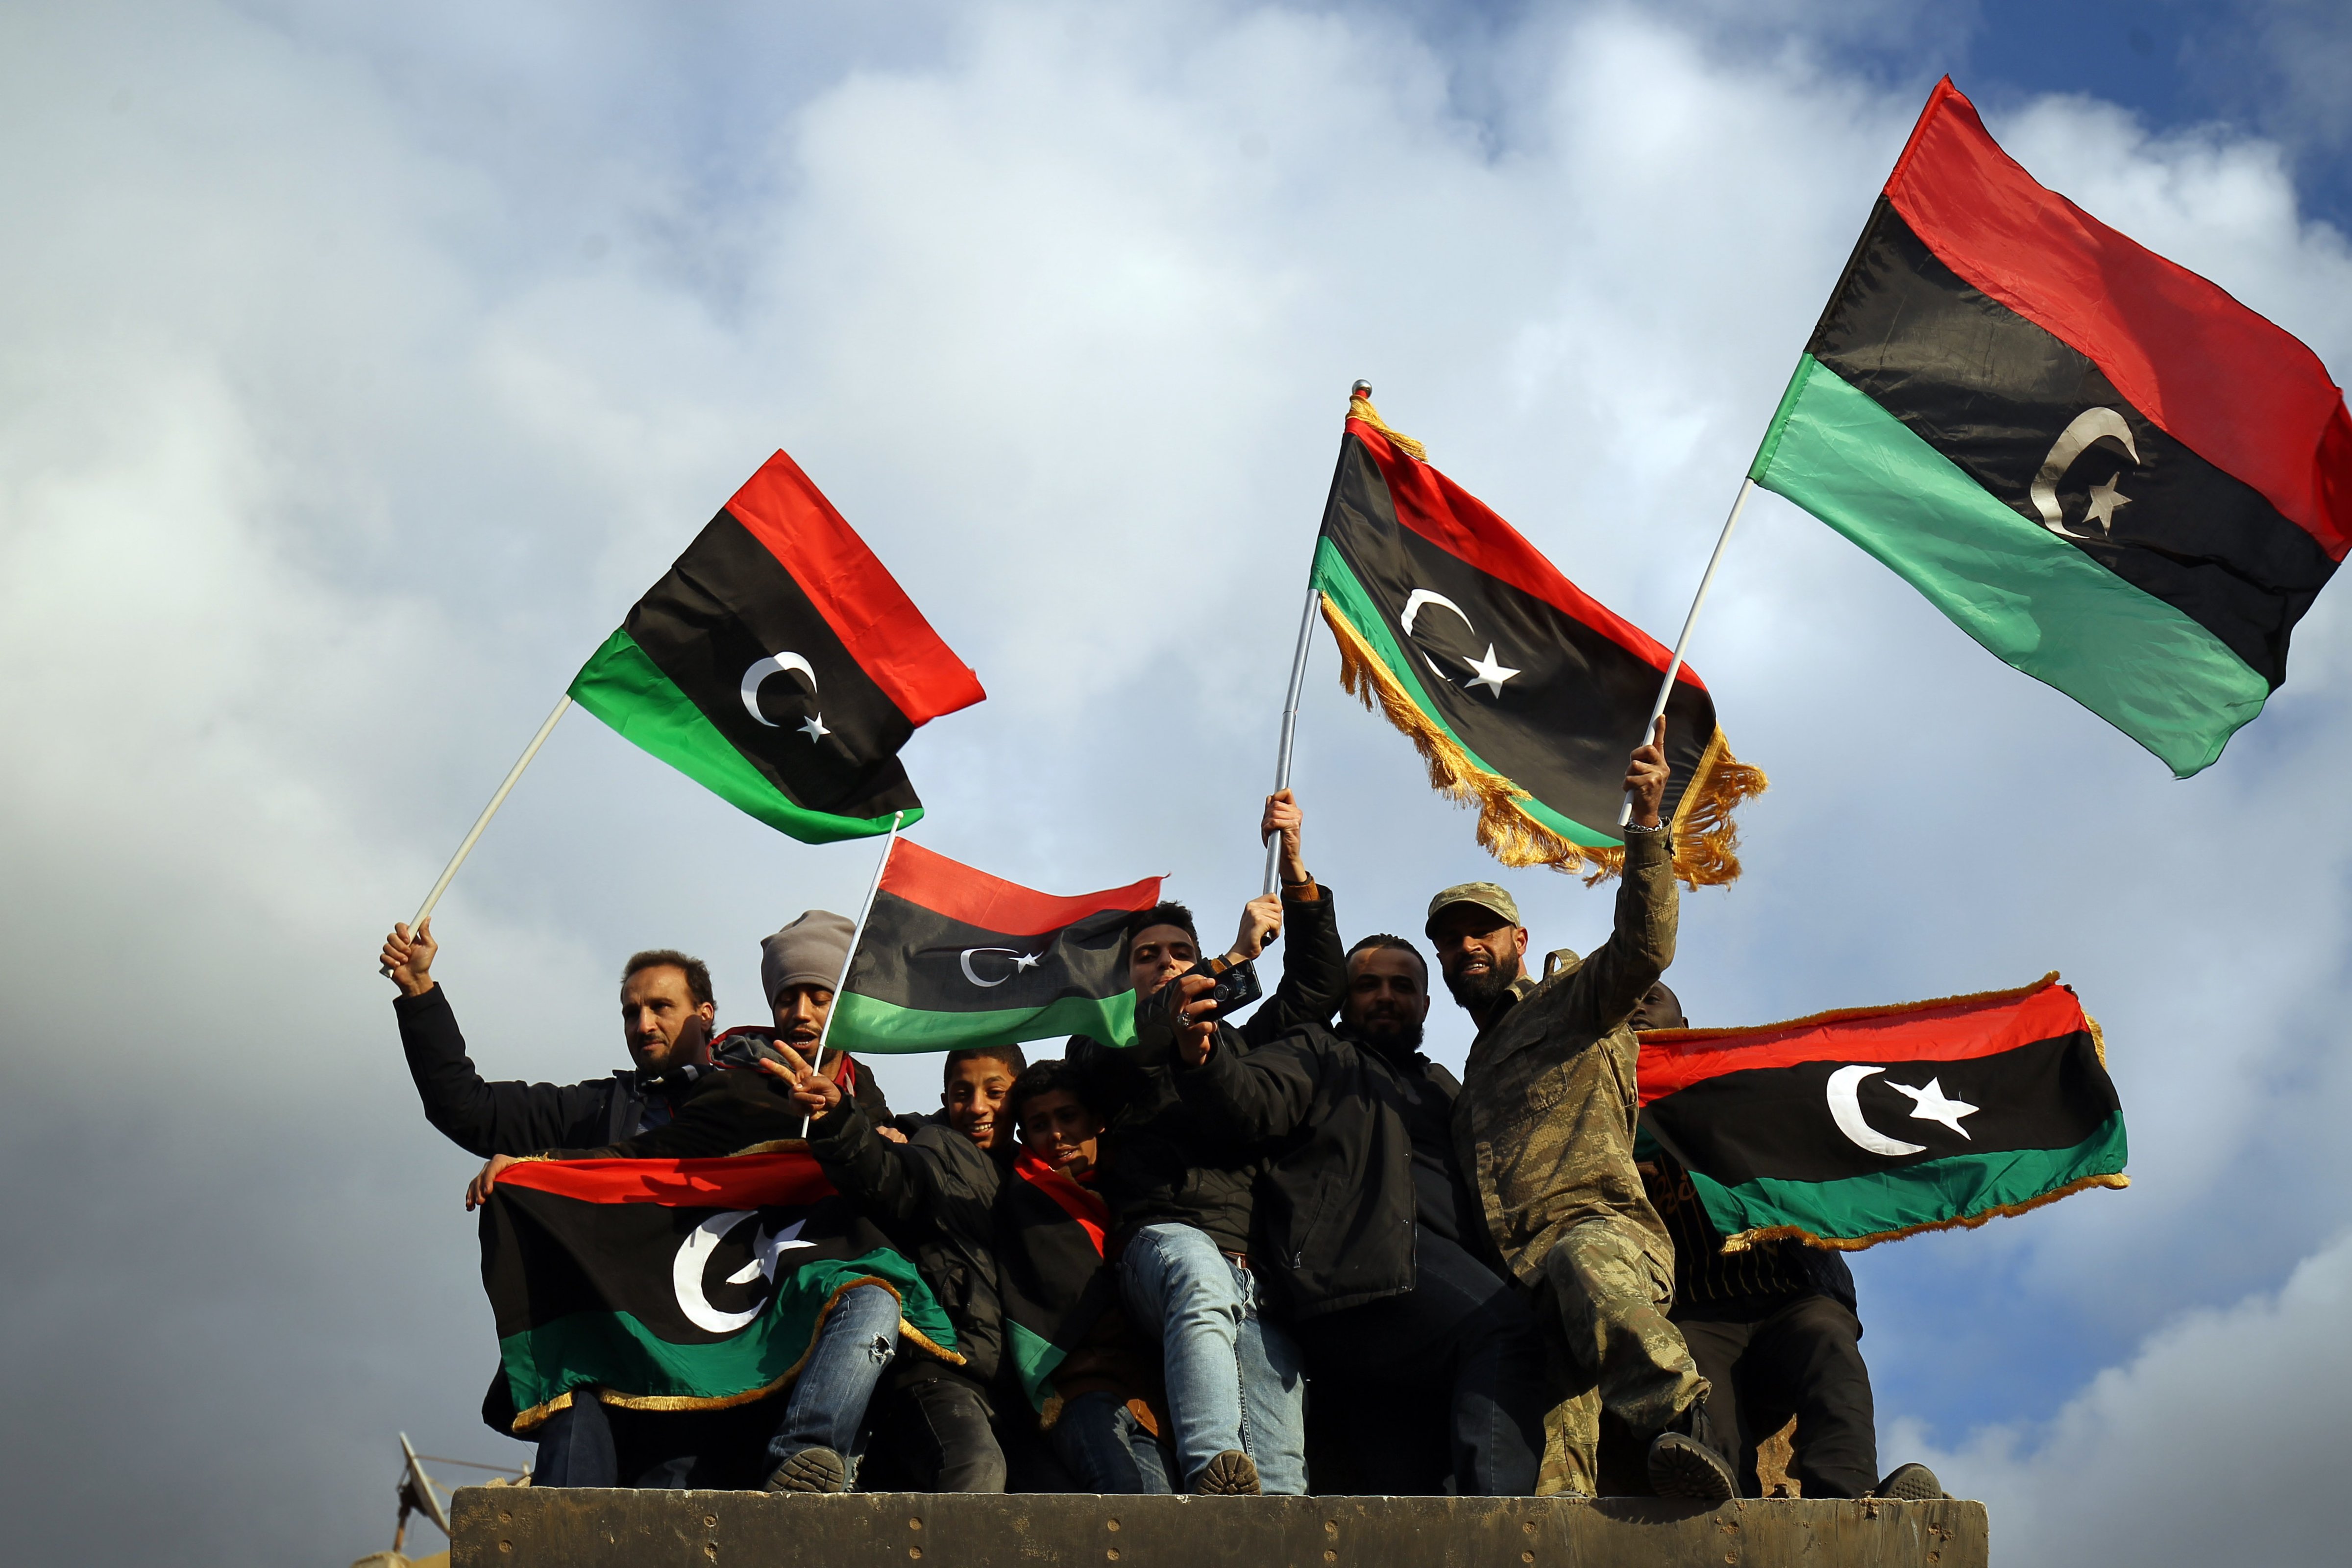 Libyans wave the national flag as they gather to mark the eighth anniversary of the uprising in Libya's second city of Benghazi, on February 17, 2019. (ABDULLAH DOMA—AFP/Getty Images)